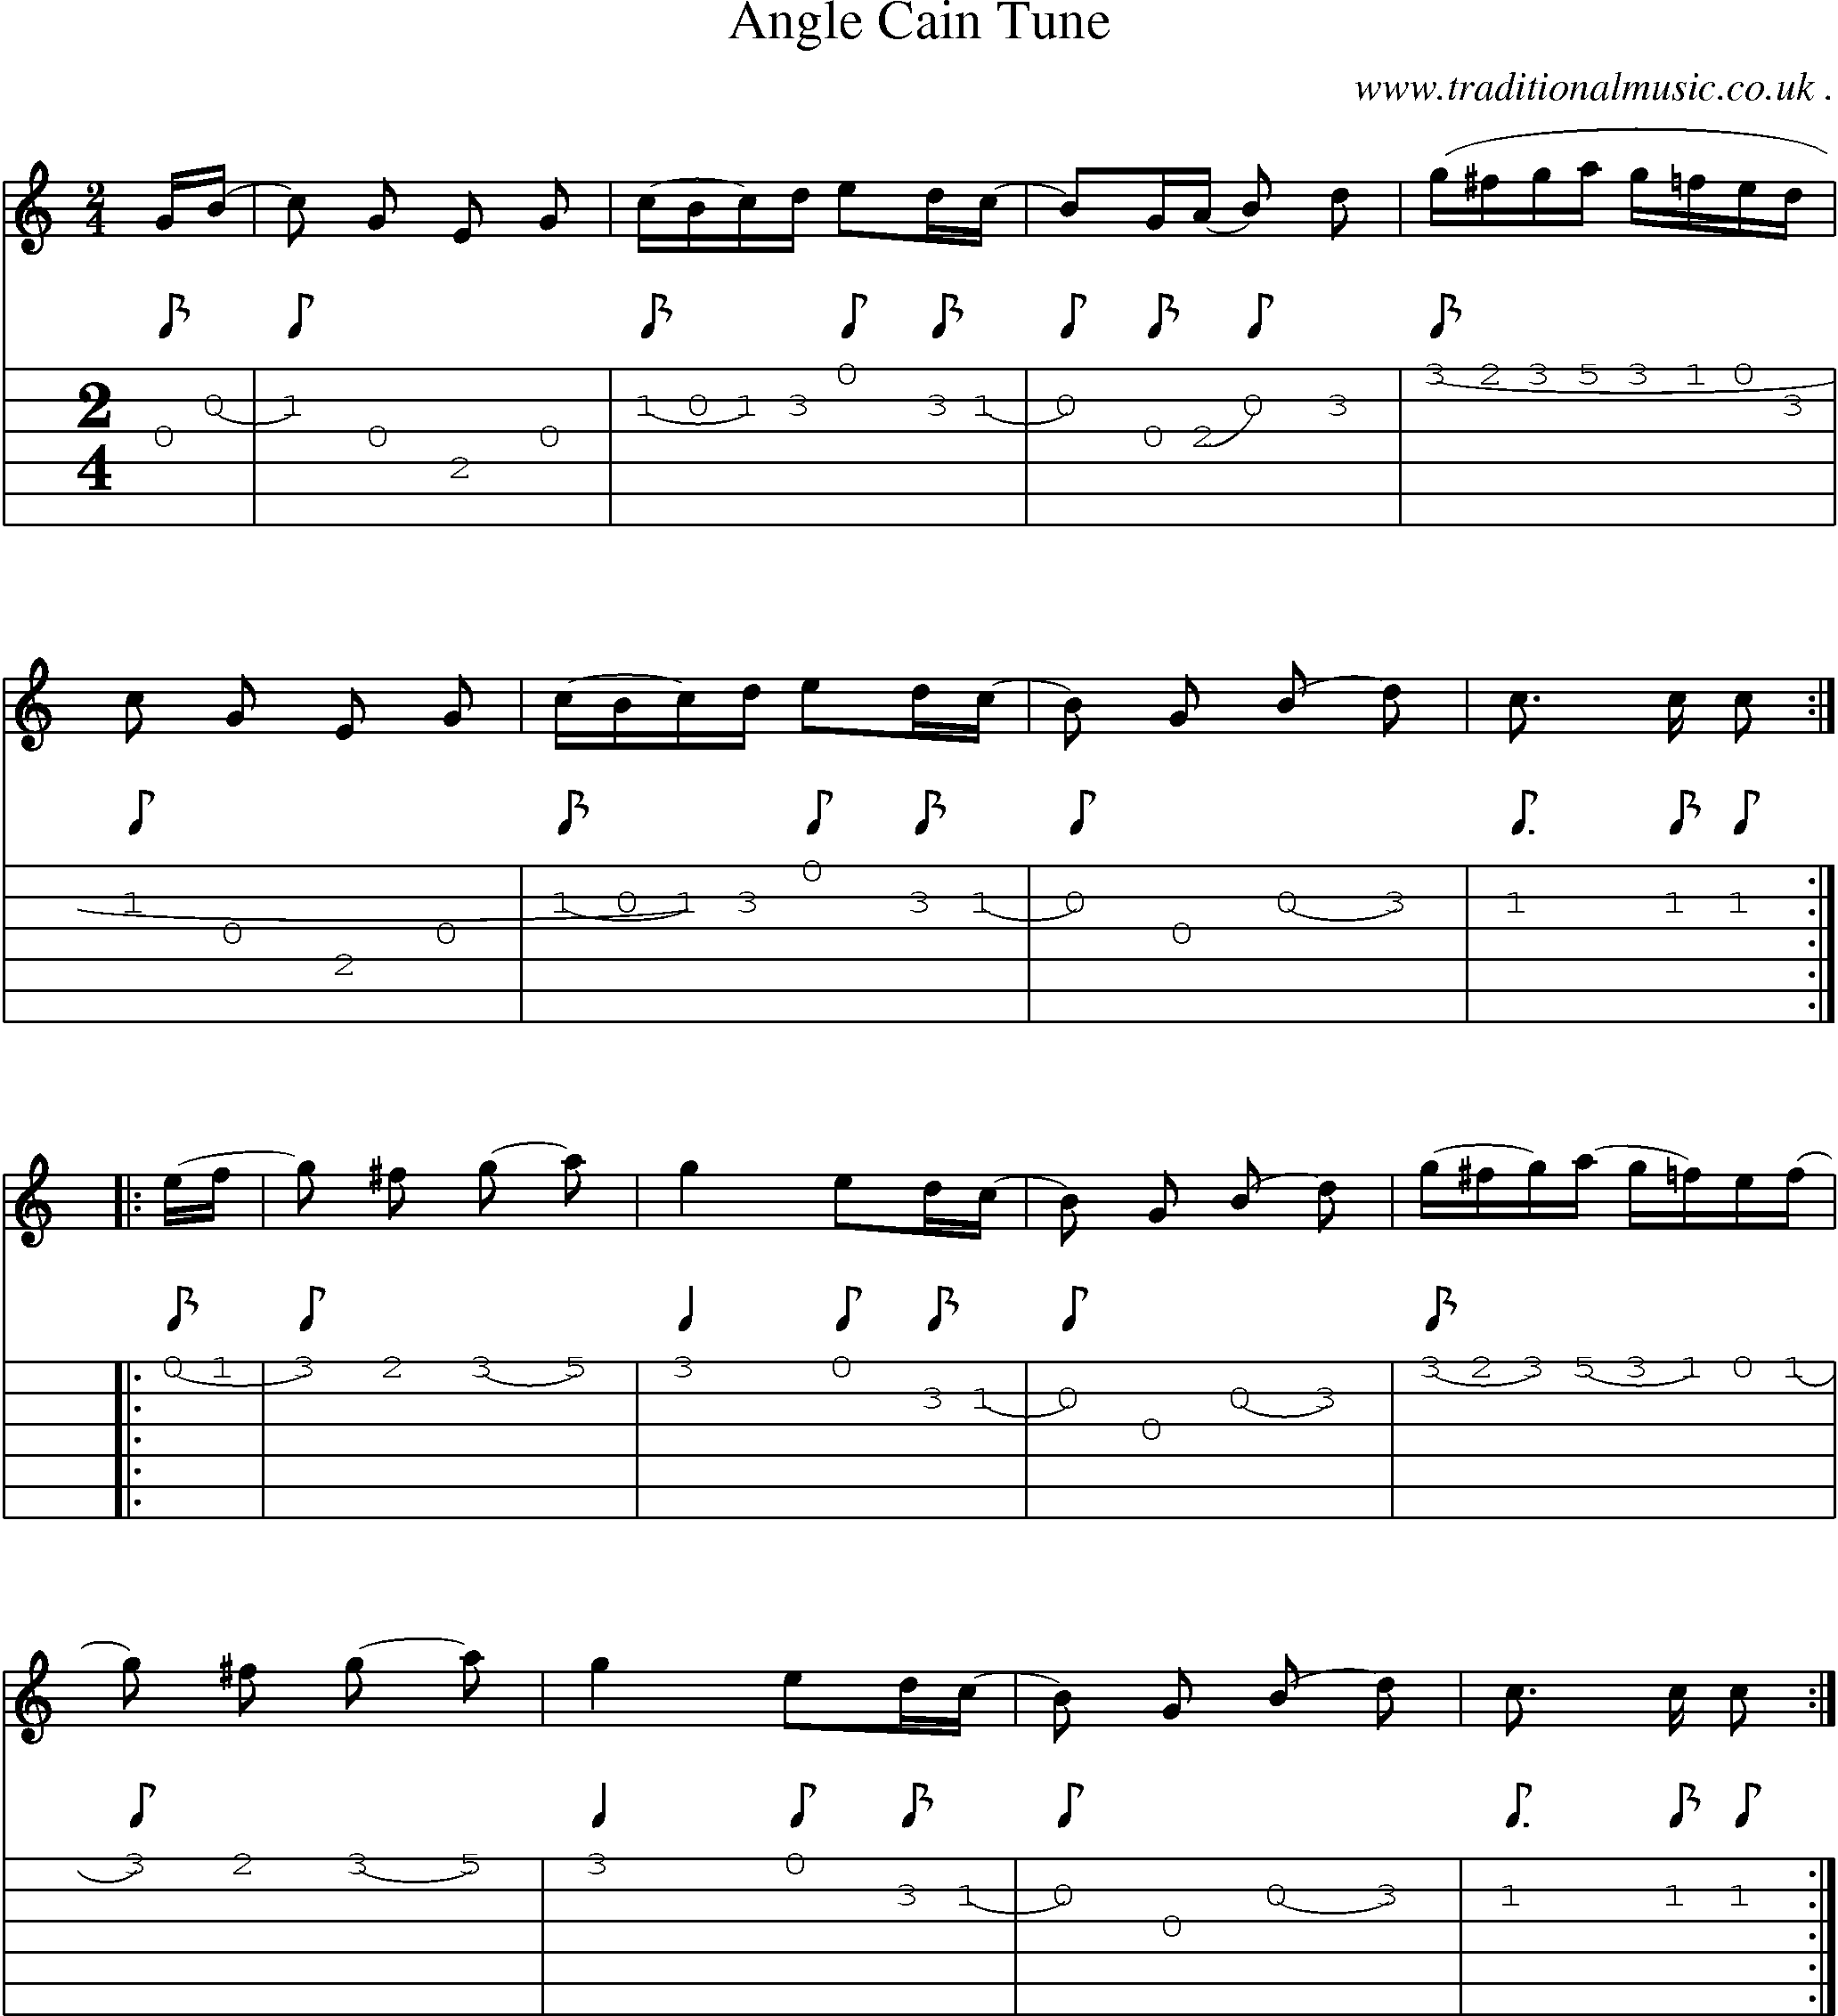 Music Score and Guitar Tabs for Angle Cain Tune